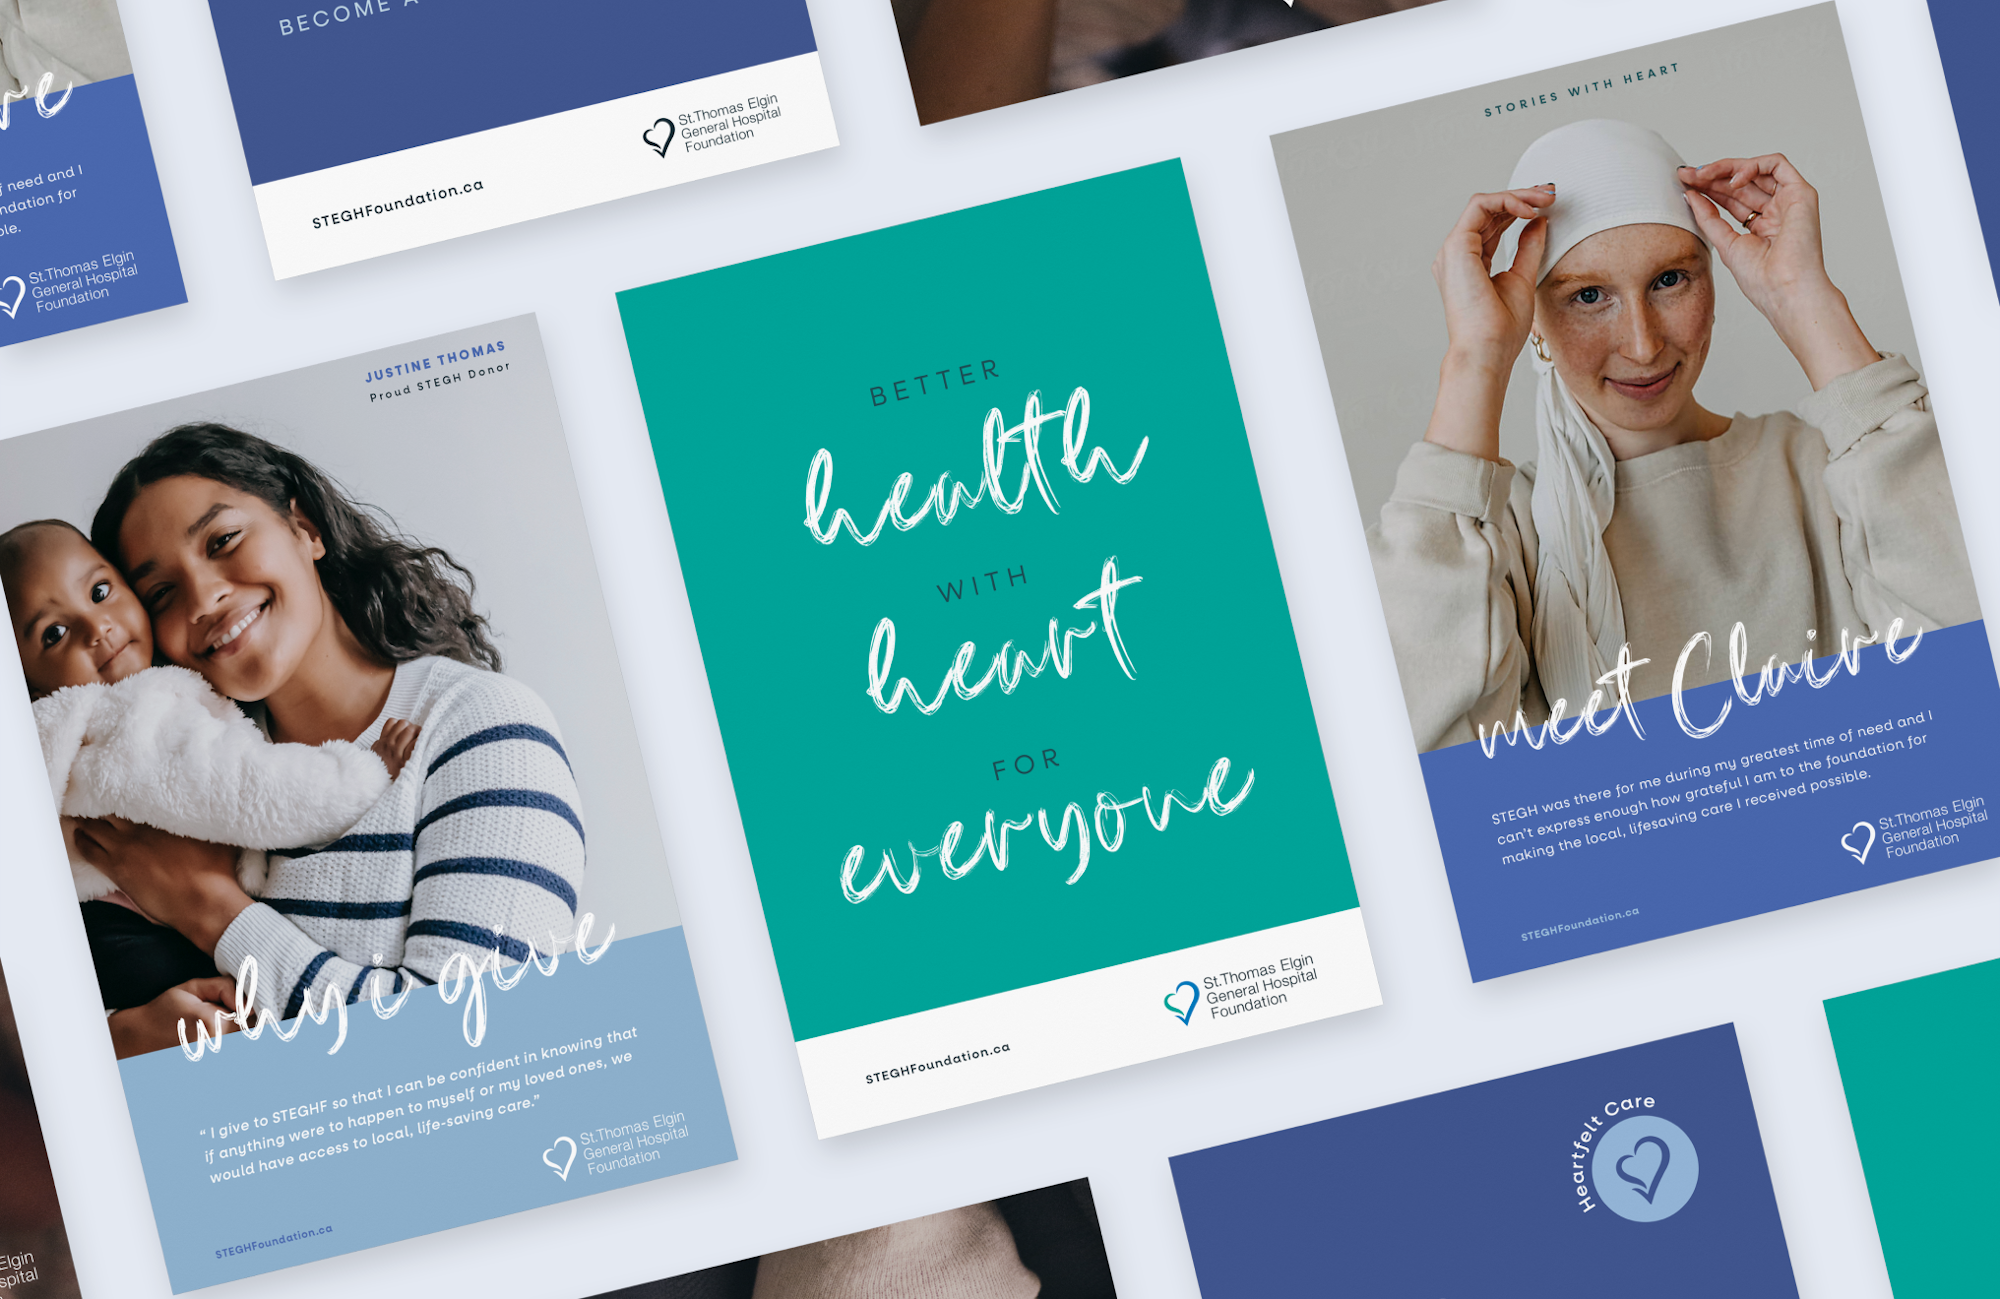 Poster mockups. Better health with heart for everyone. 